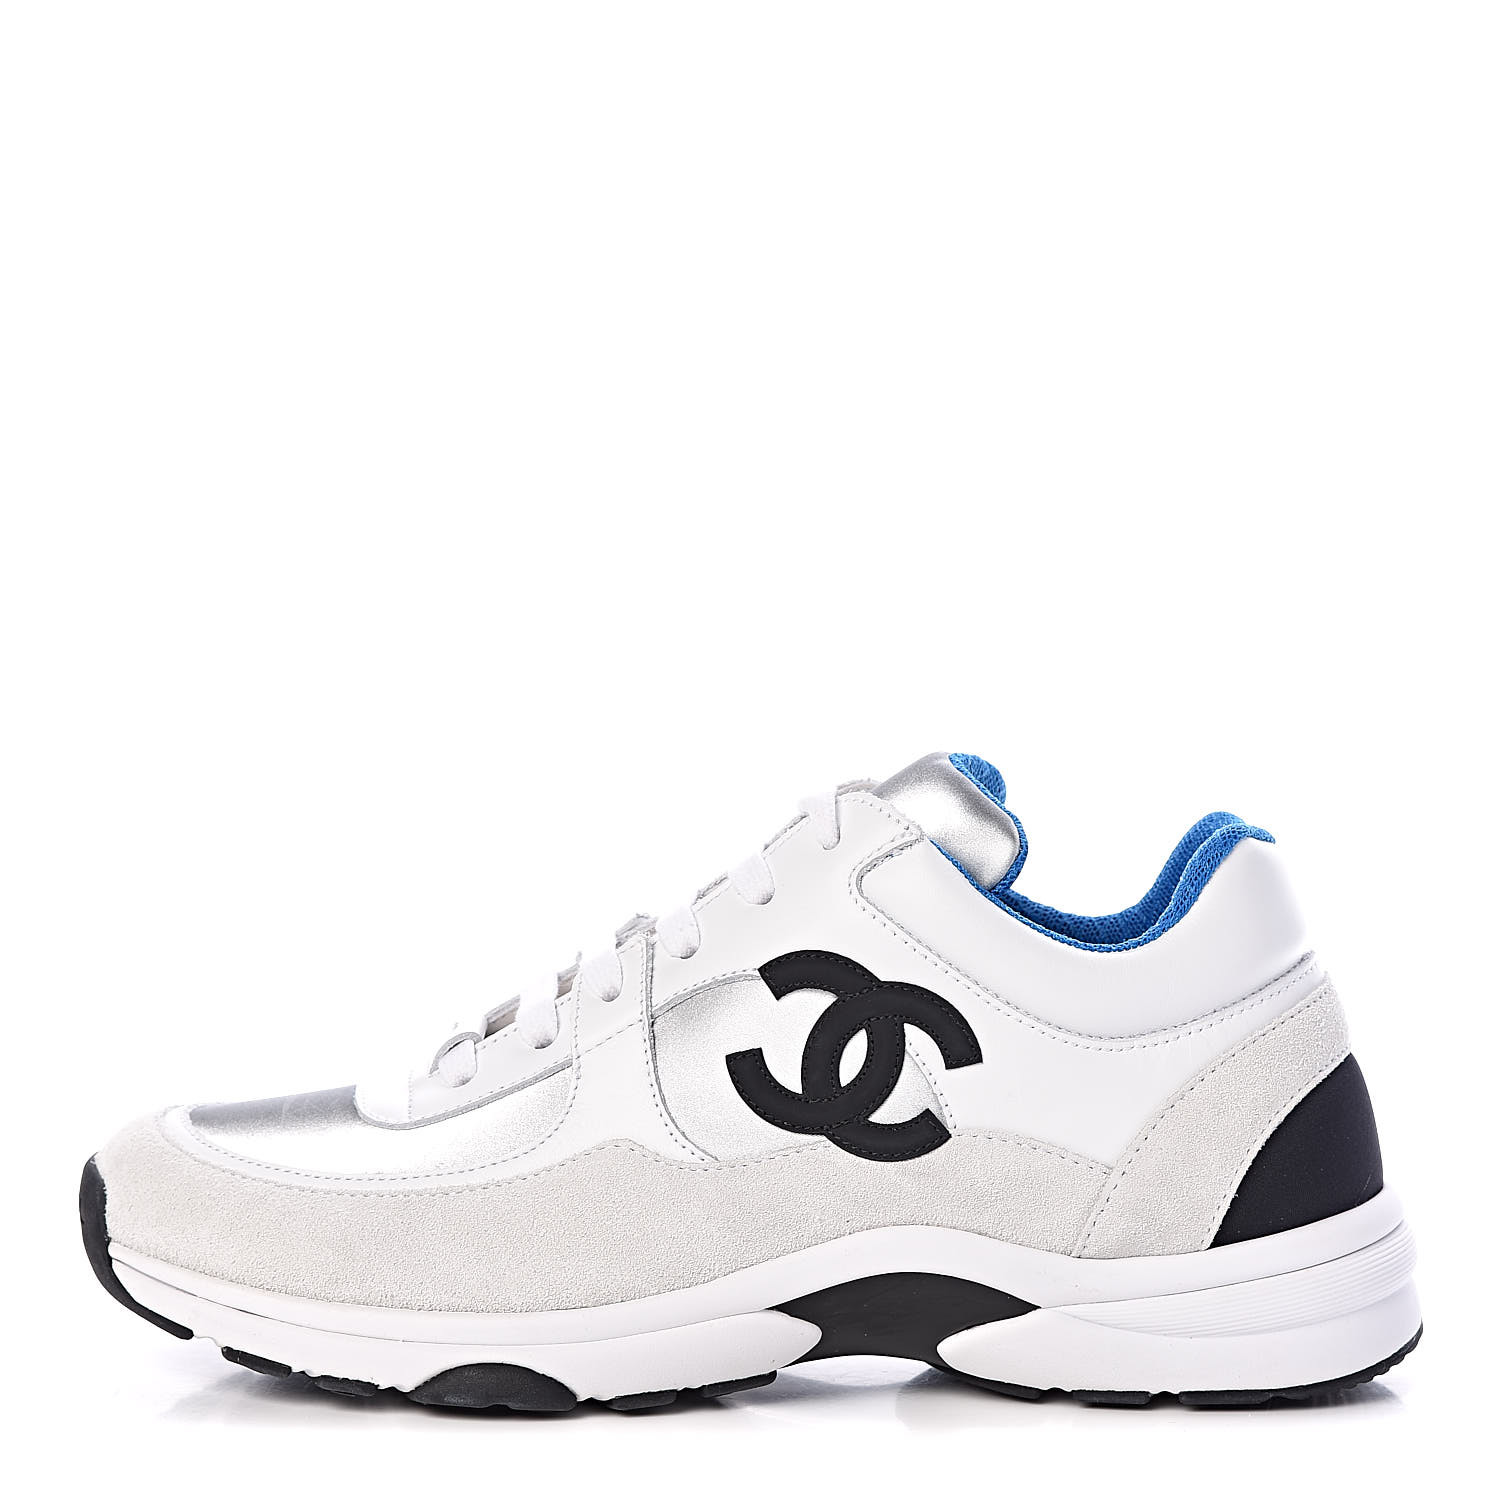 CHANEL Suede Calfskin Womens CC Sneakers 39.5 White Silver Blue 425617